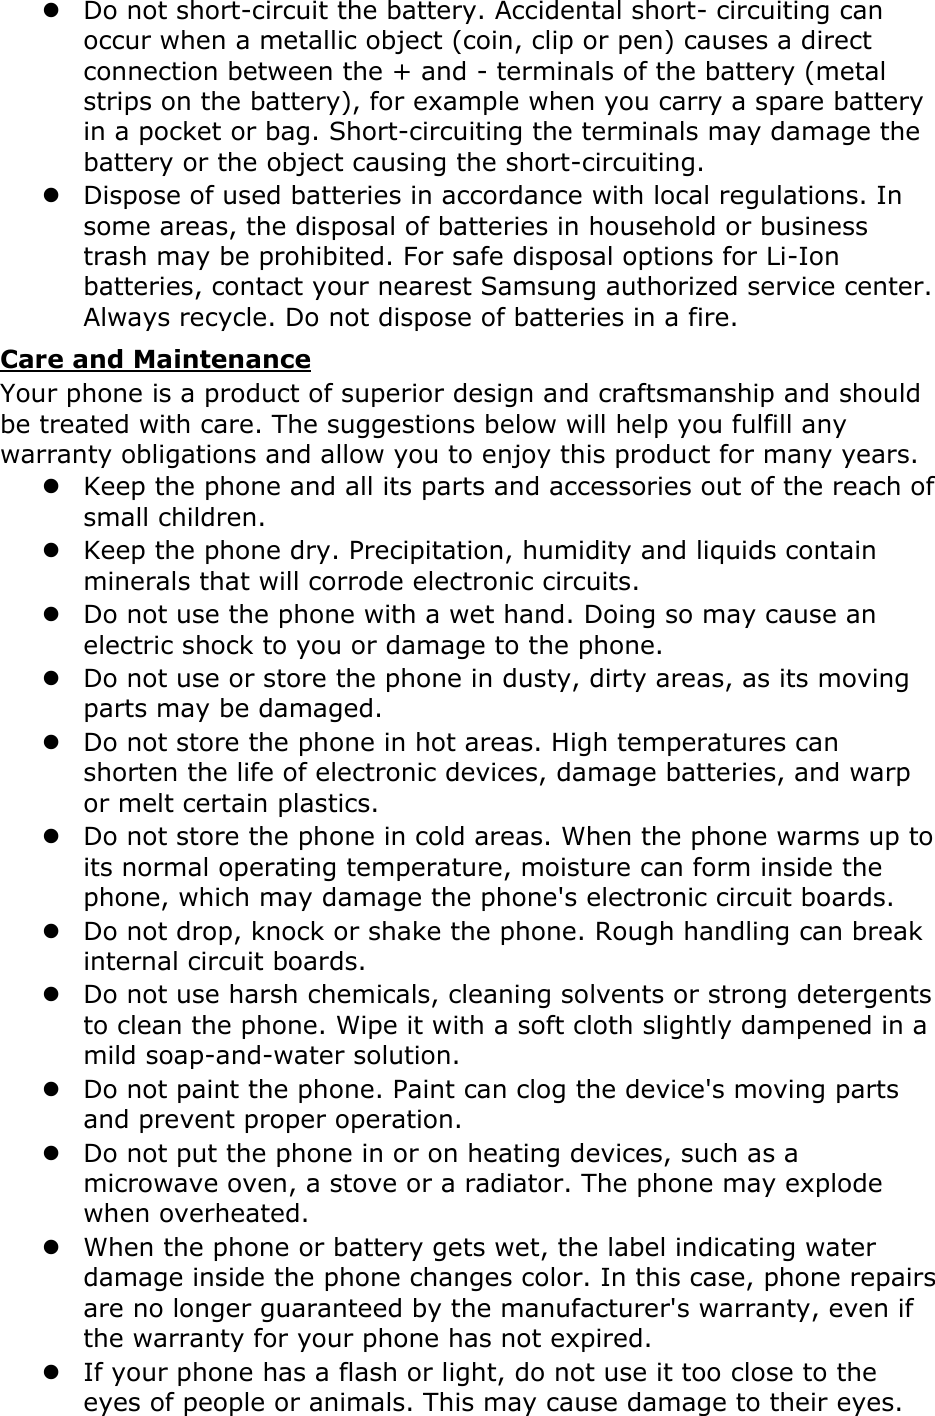 Page 20 of Samsung Electronics Co GTI9070P Cellular/PCS GSM/EDGE/WCDMA Phone with WLAN, RFID and Bluetooth User Manual